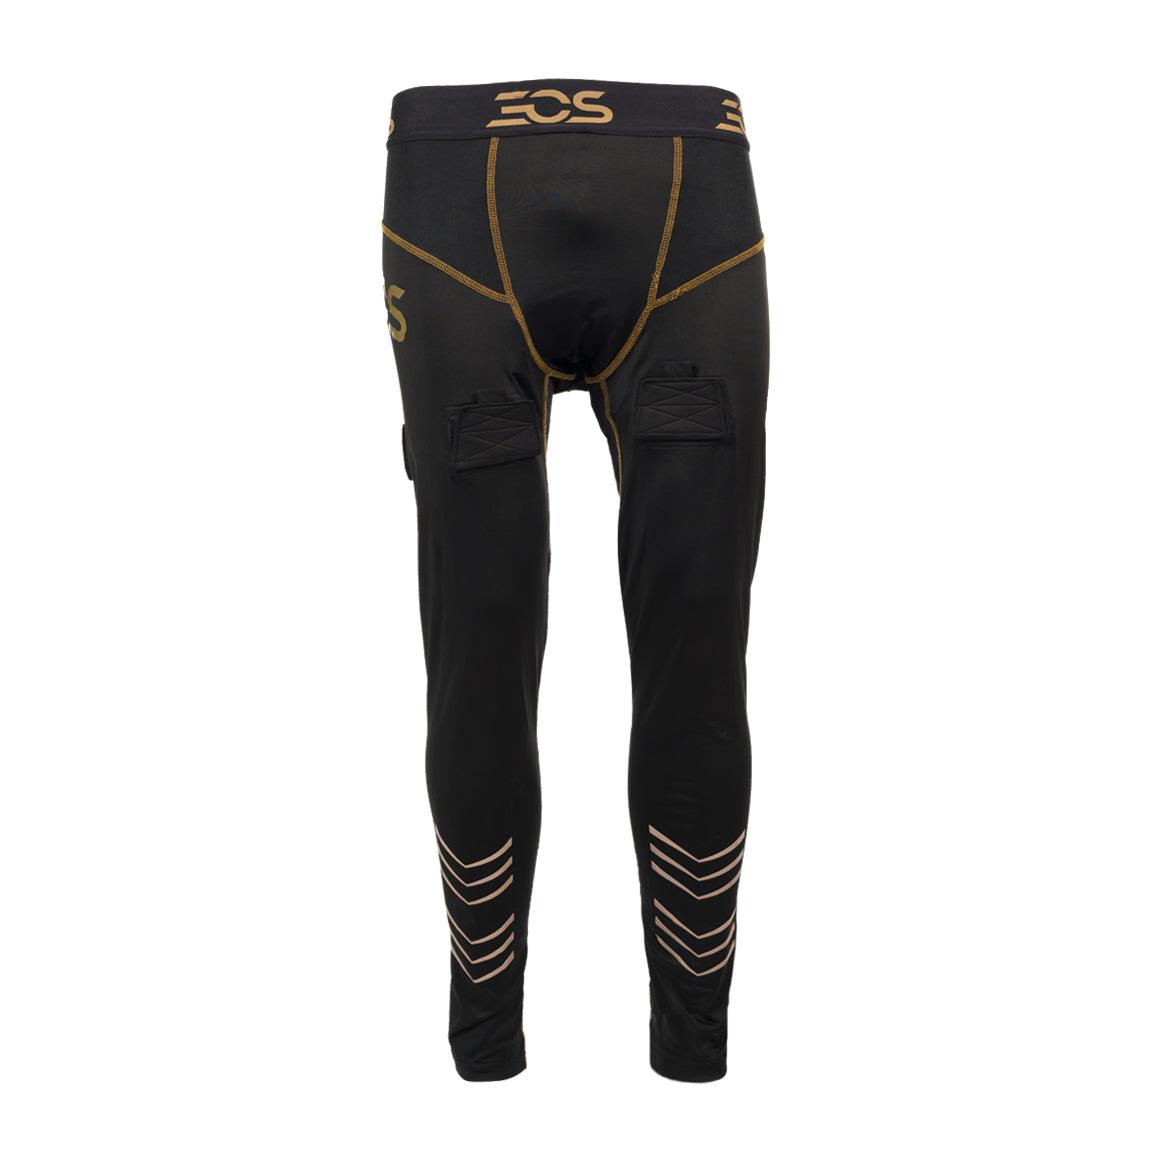 EOS 50 Boy's Compression Baselayer Pants (w/ Cup & Velcro) - Junior - Sports Excellence